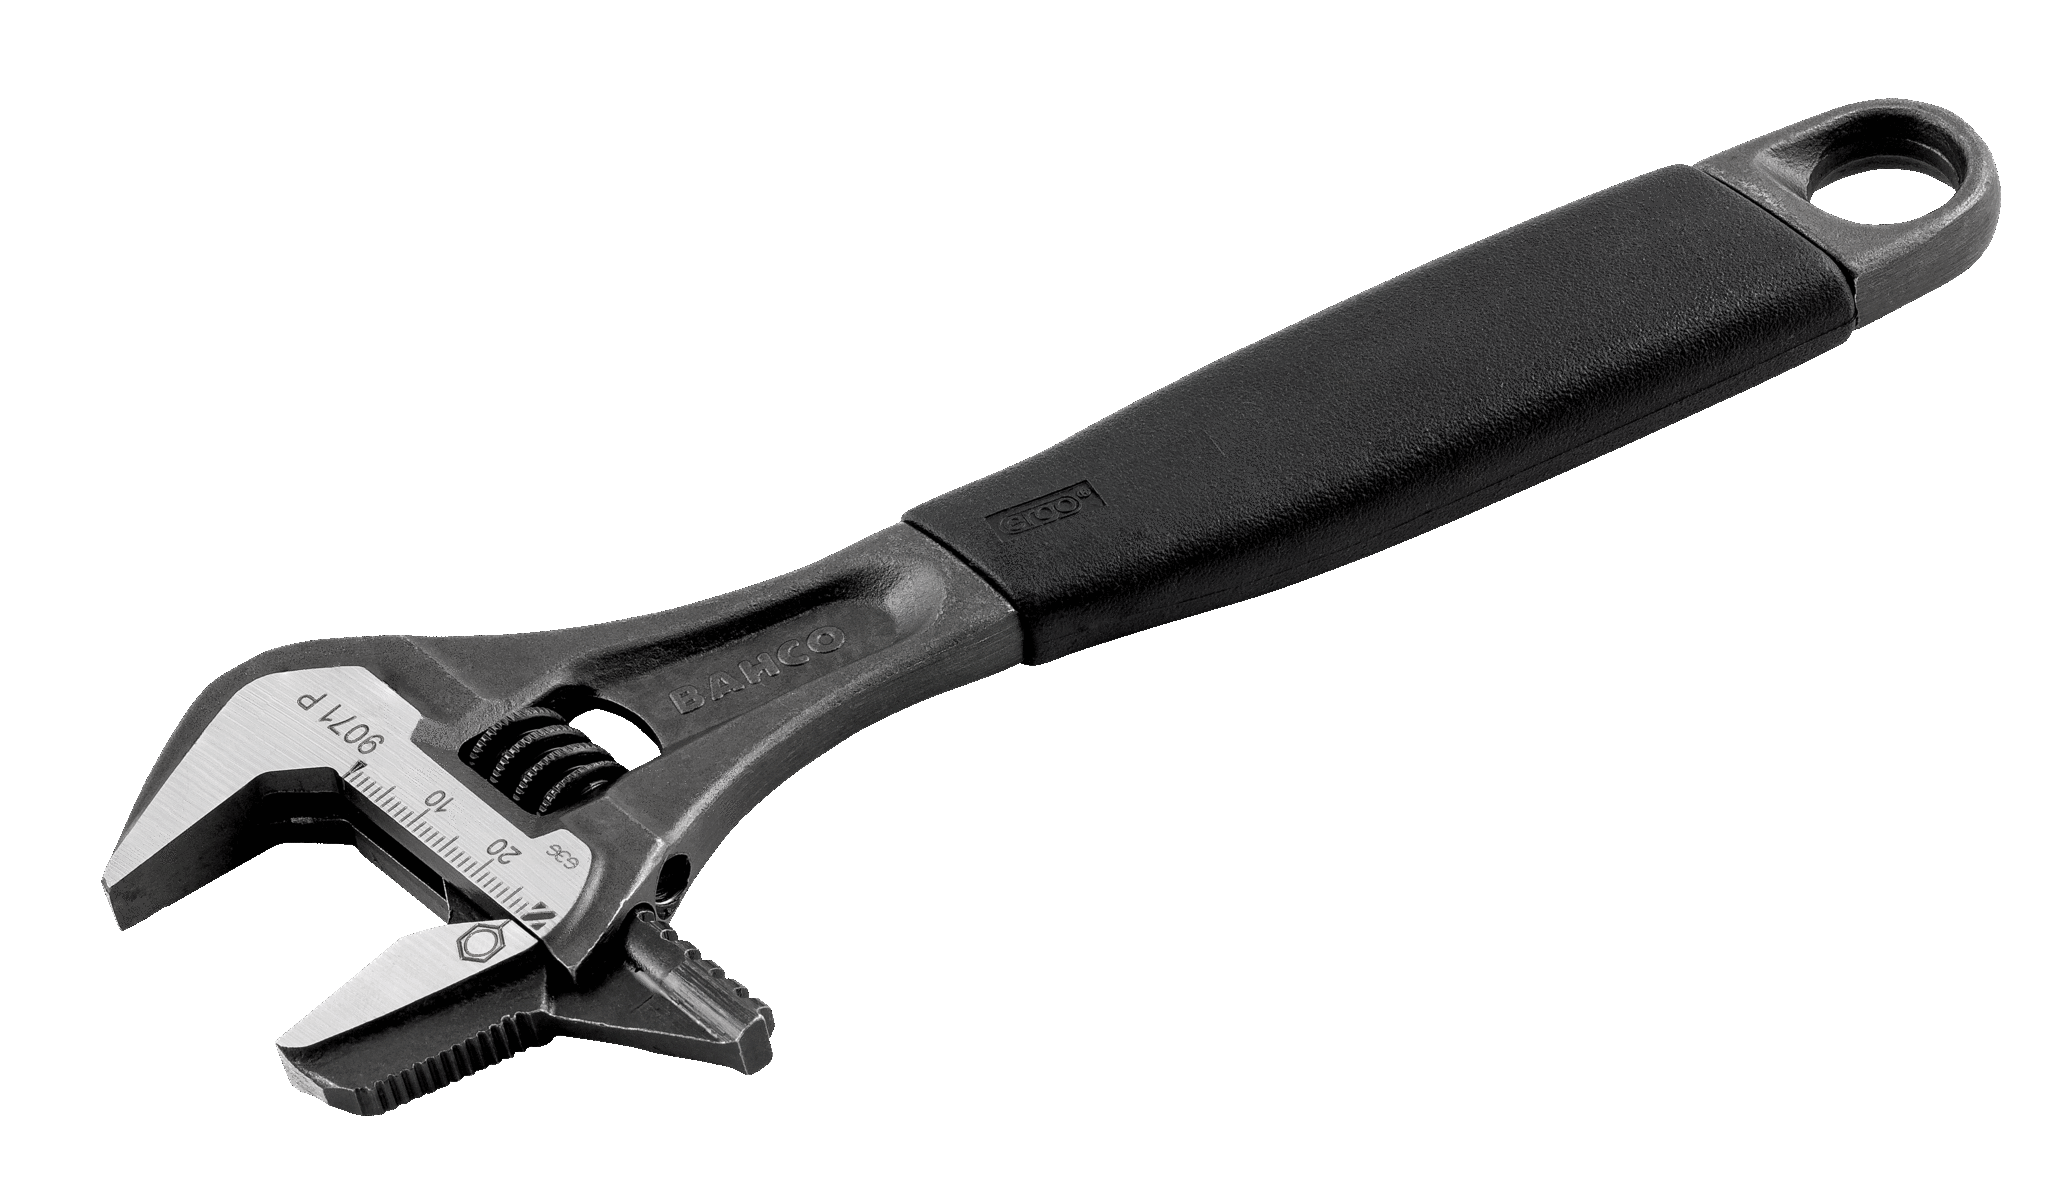 ERGO™ rubber handle central nut phosphated adjustable wrench, with reversible jaw - 9071 P by Bahco